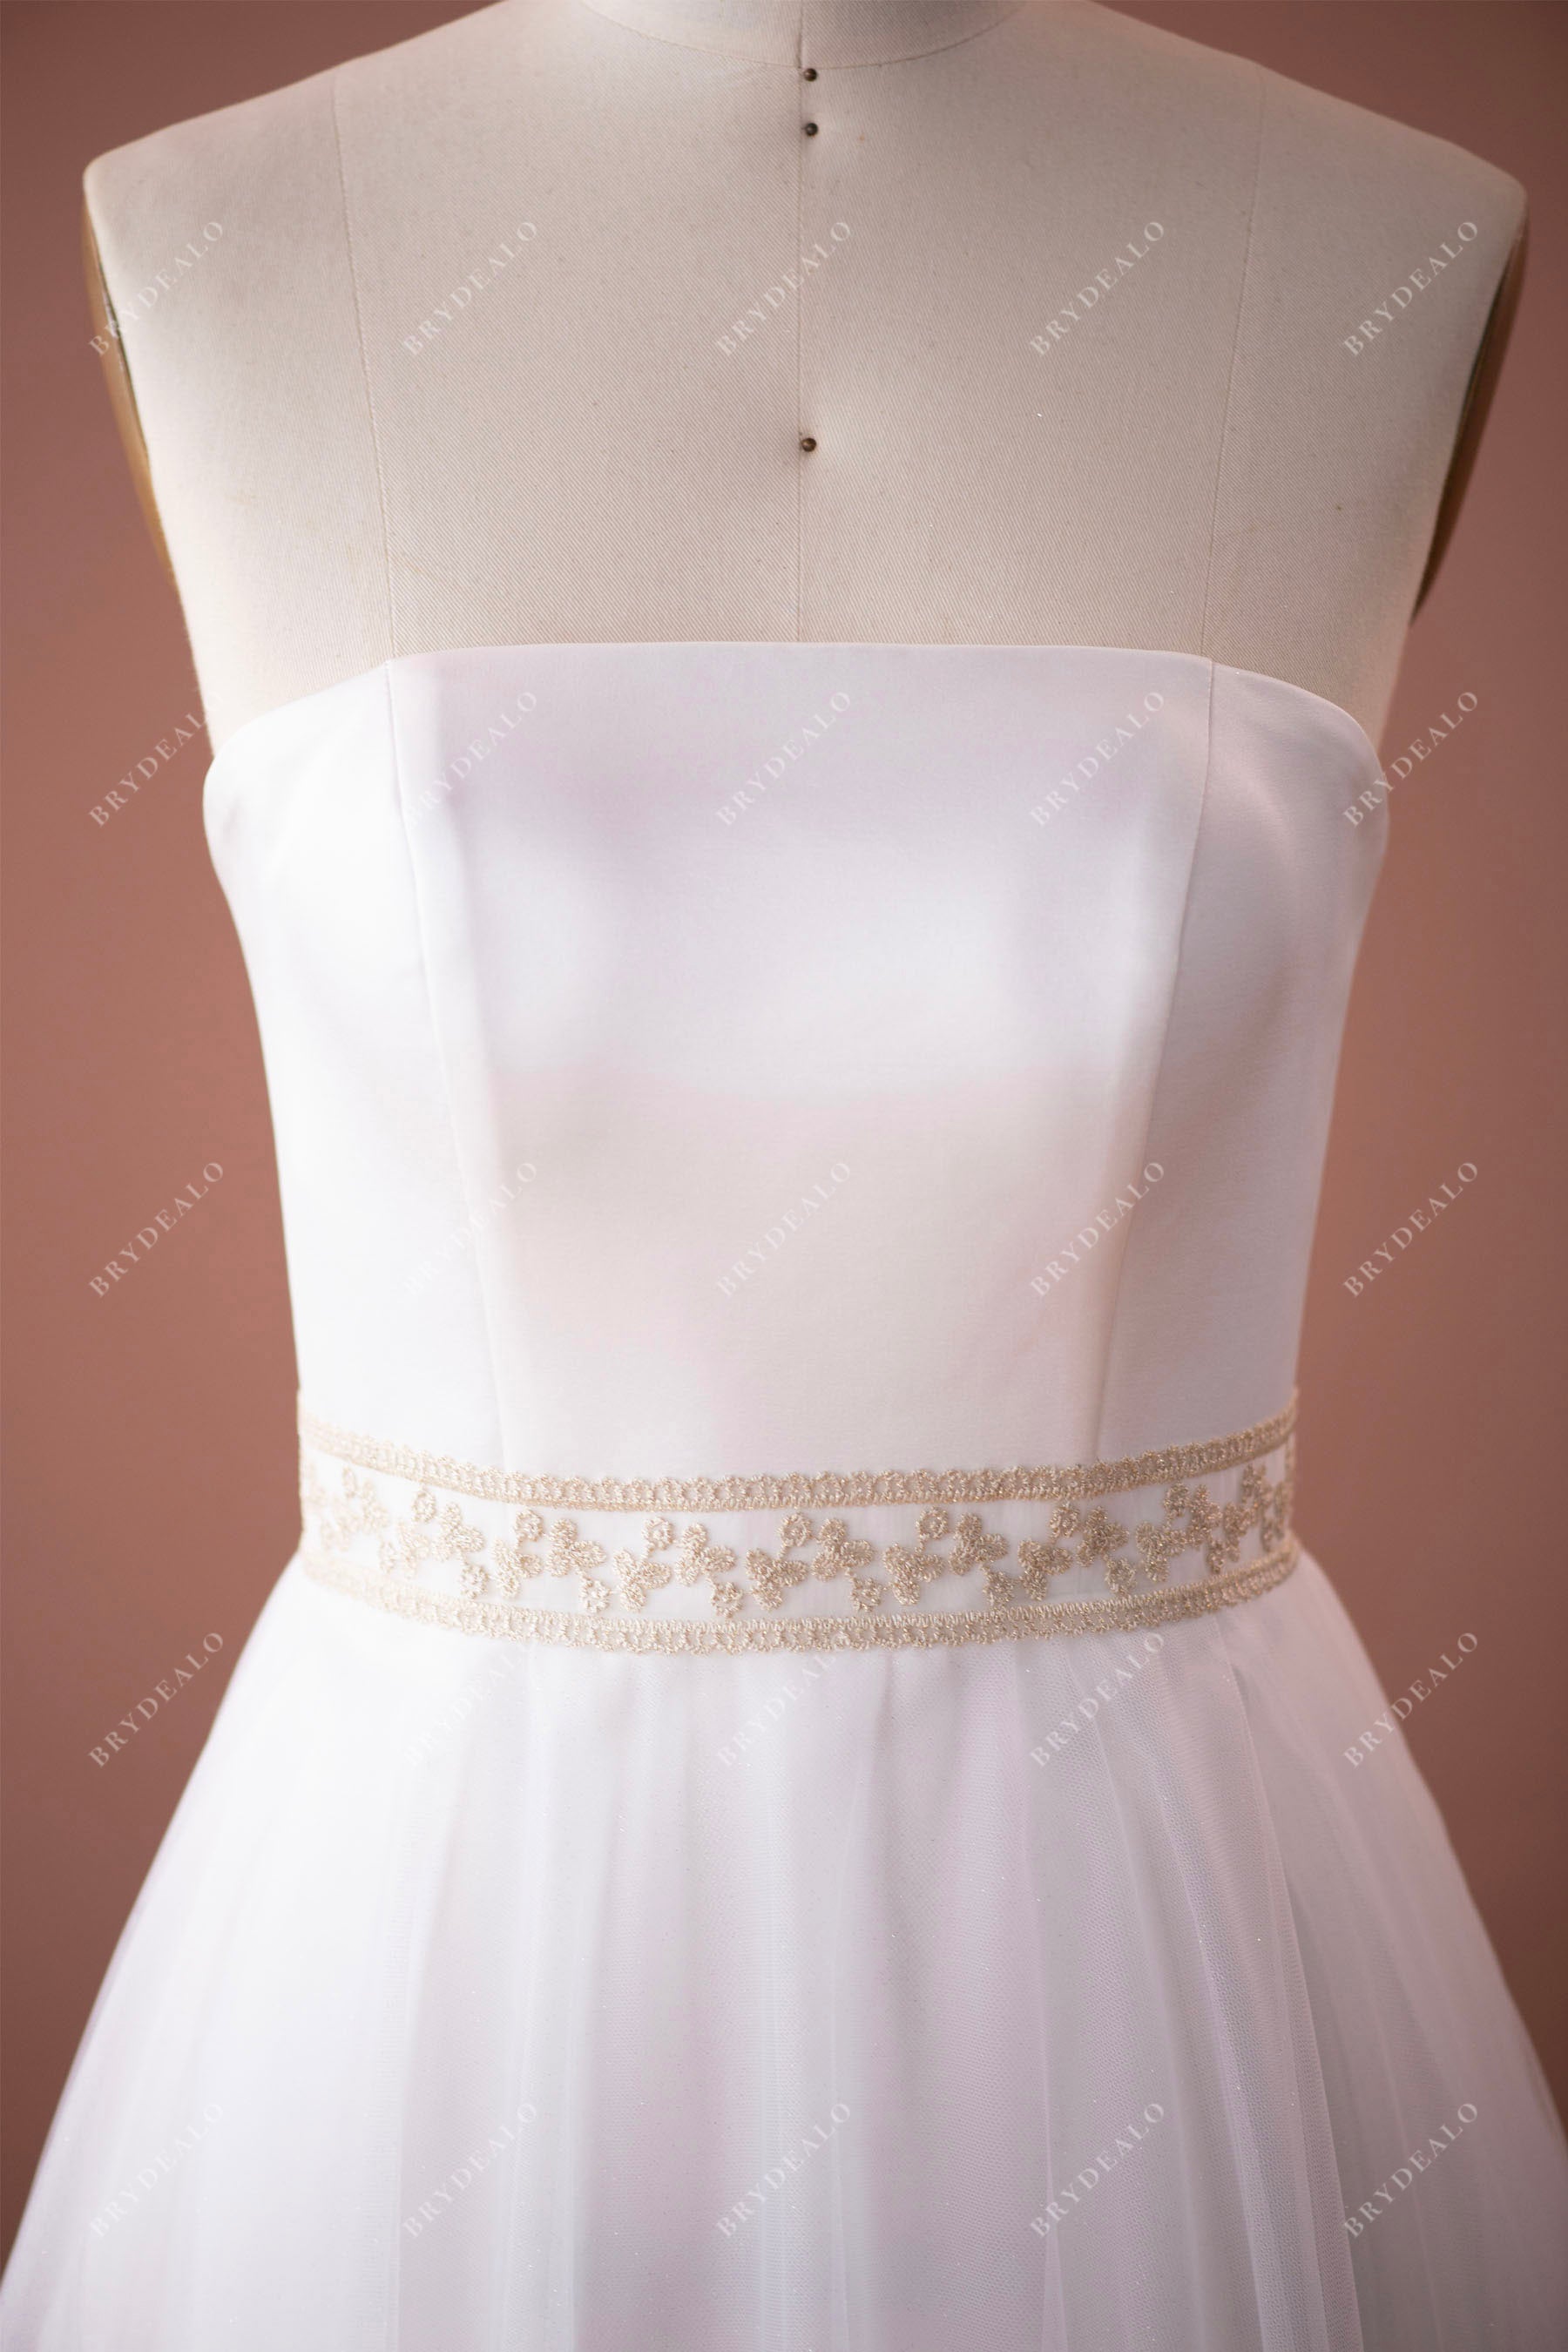 strapless straight across neck A-line wedding dress with champagne belt